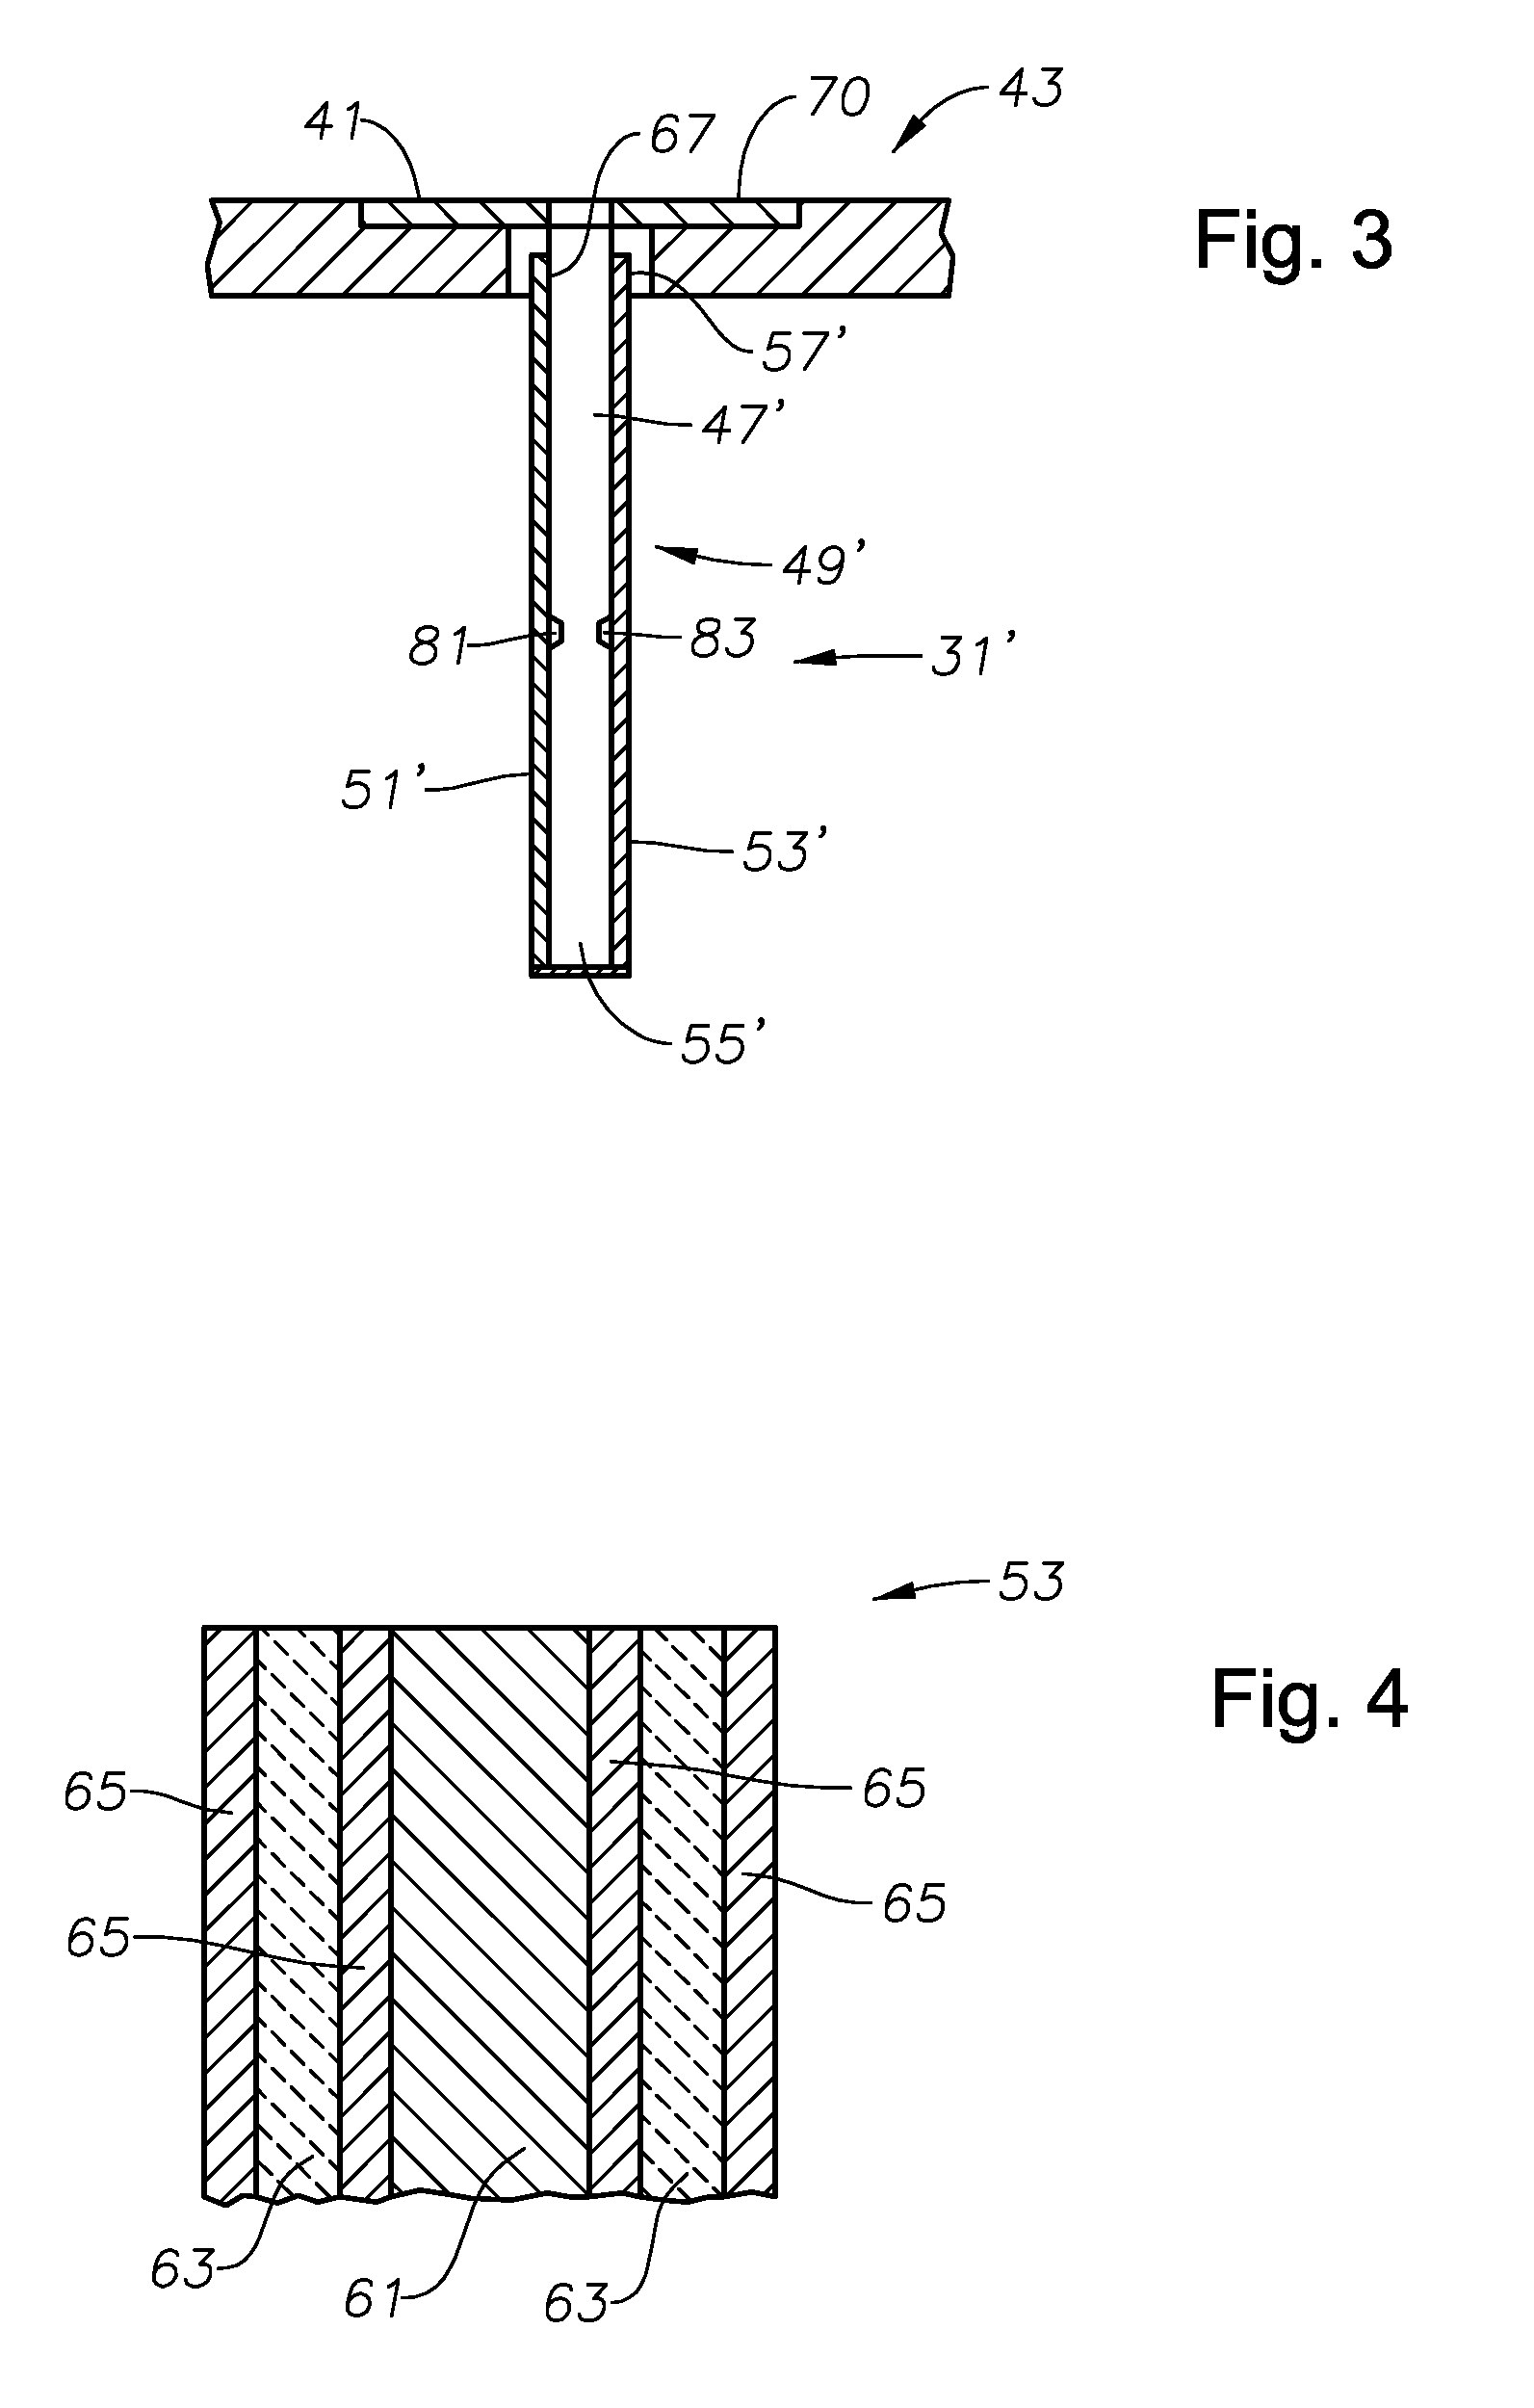 Synthetic jet actuator system and related methods